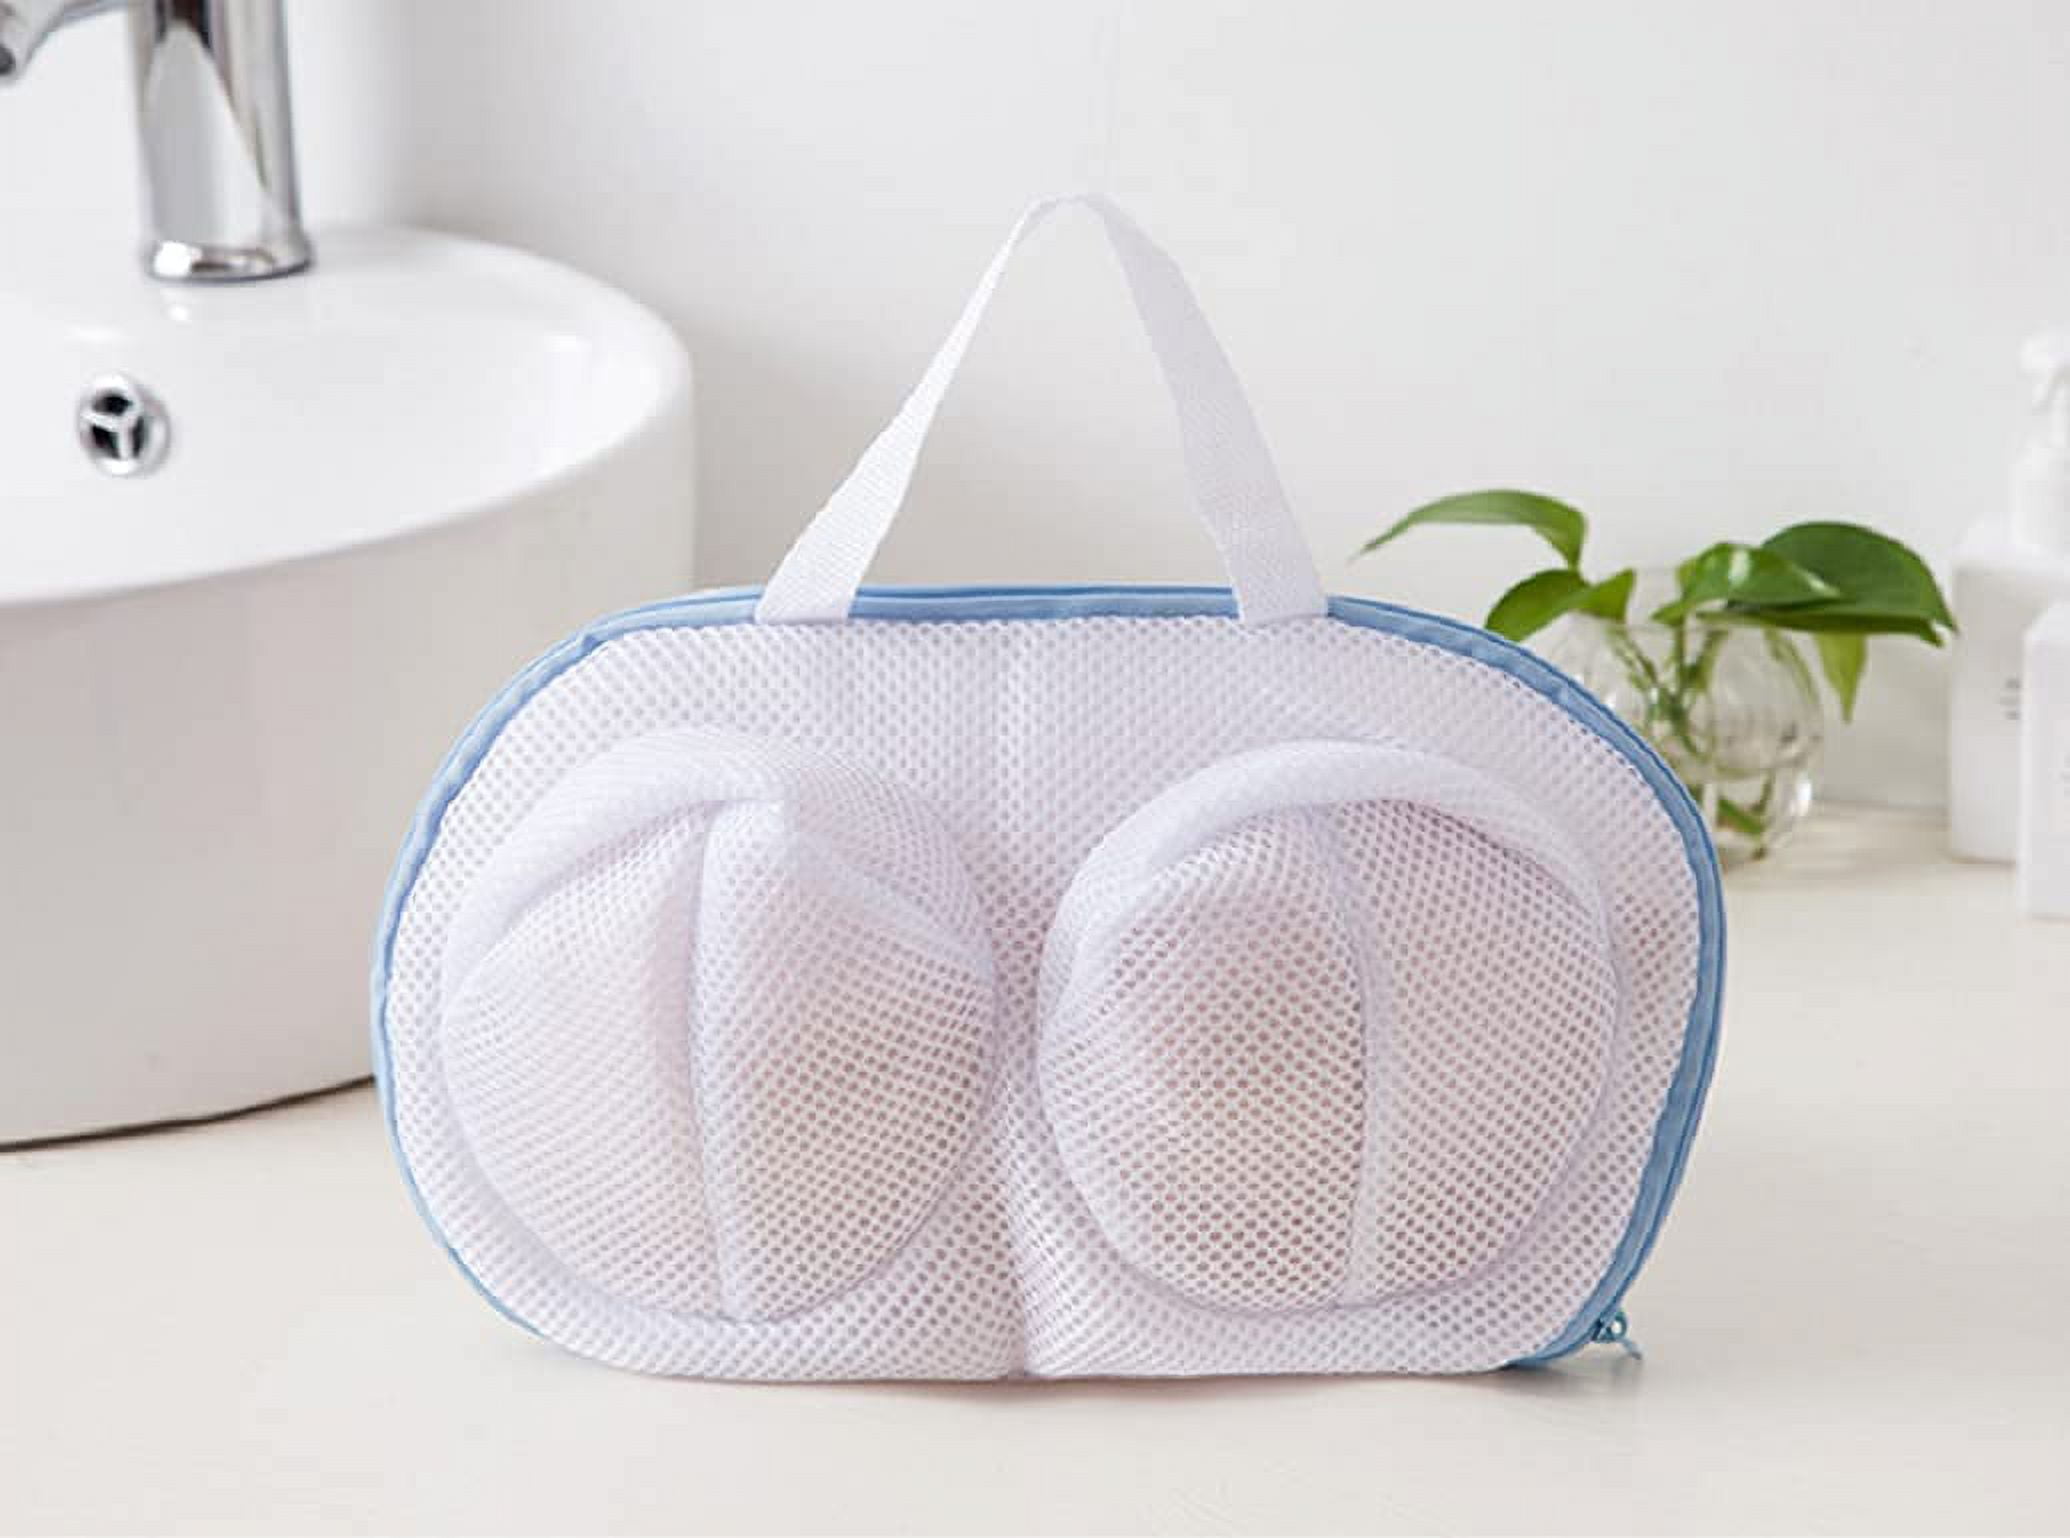 Large Mesh Lingerie Bags for Laundry, Bra Washing Bag for Washing Machine/ Washer, A to G Cup Anti Deformation Bra Bag, Laundry Science Premium Bra  Wash Bag for Bras Lingerie Delicates, 